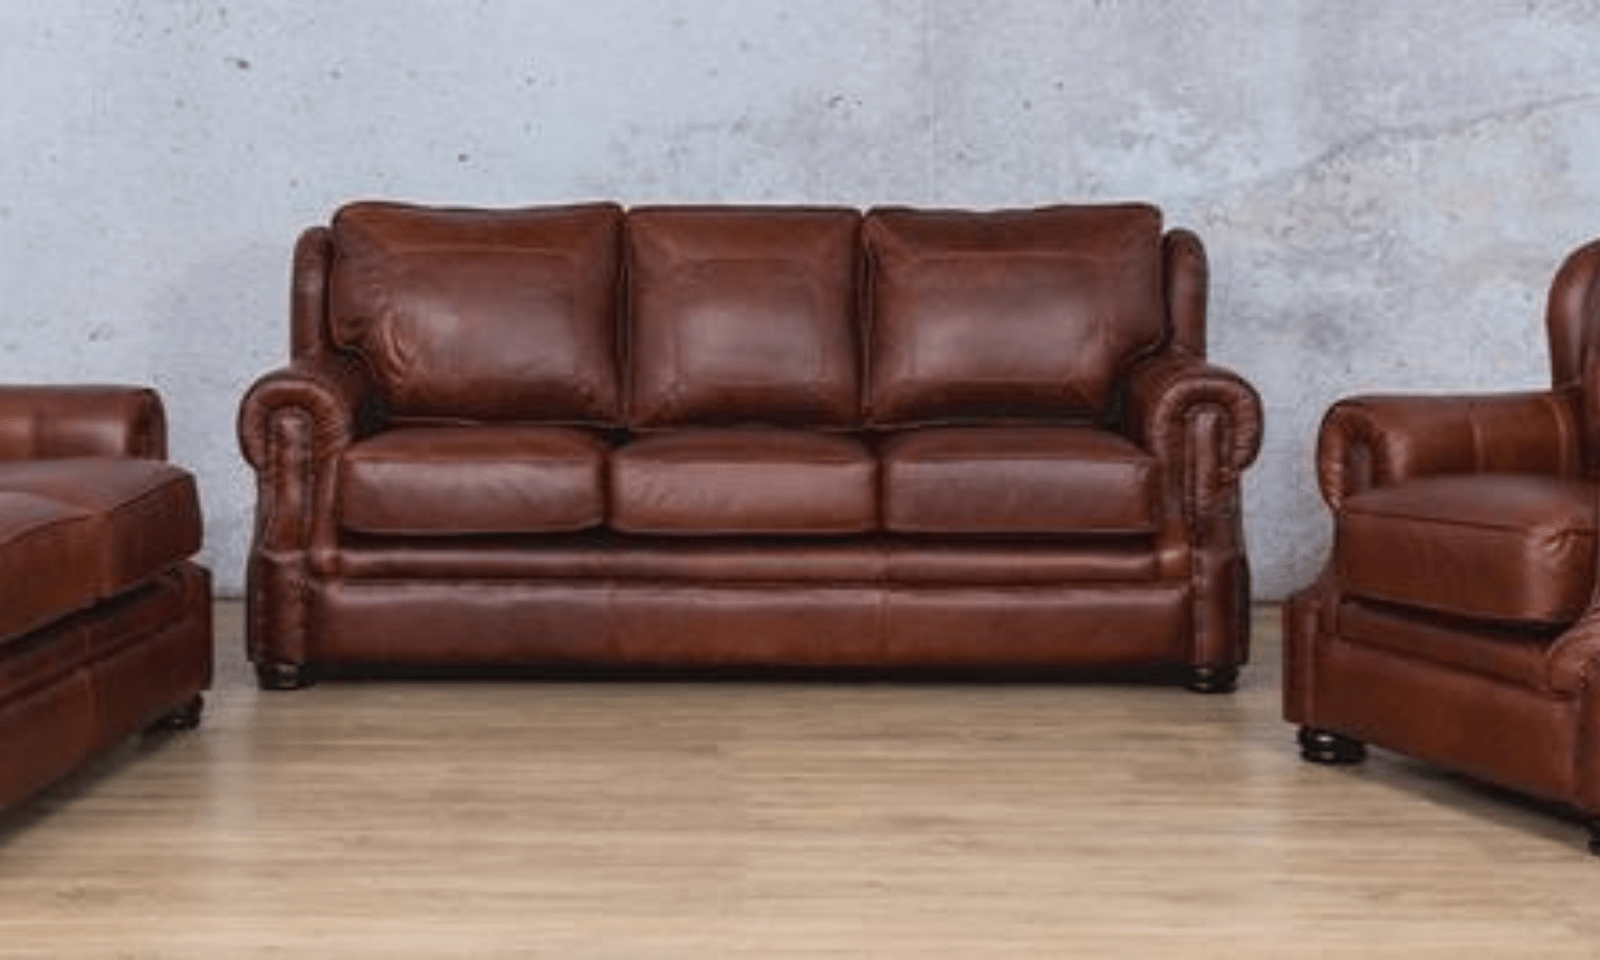 DISCOVER THE HIGHPOINT LEATHER SOFA SUITE